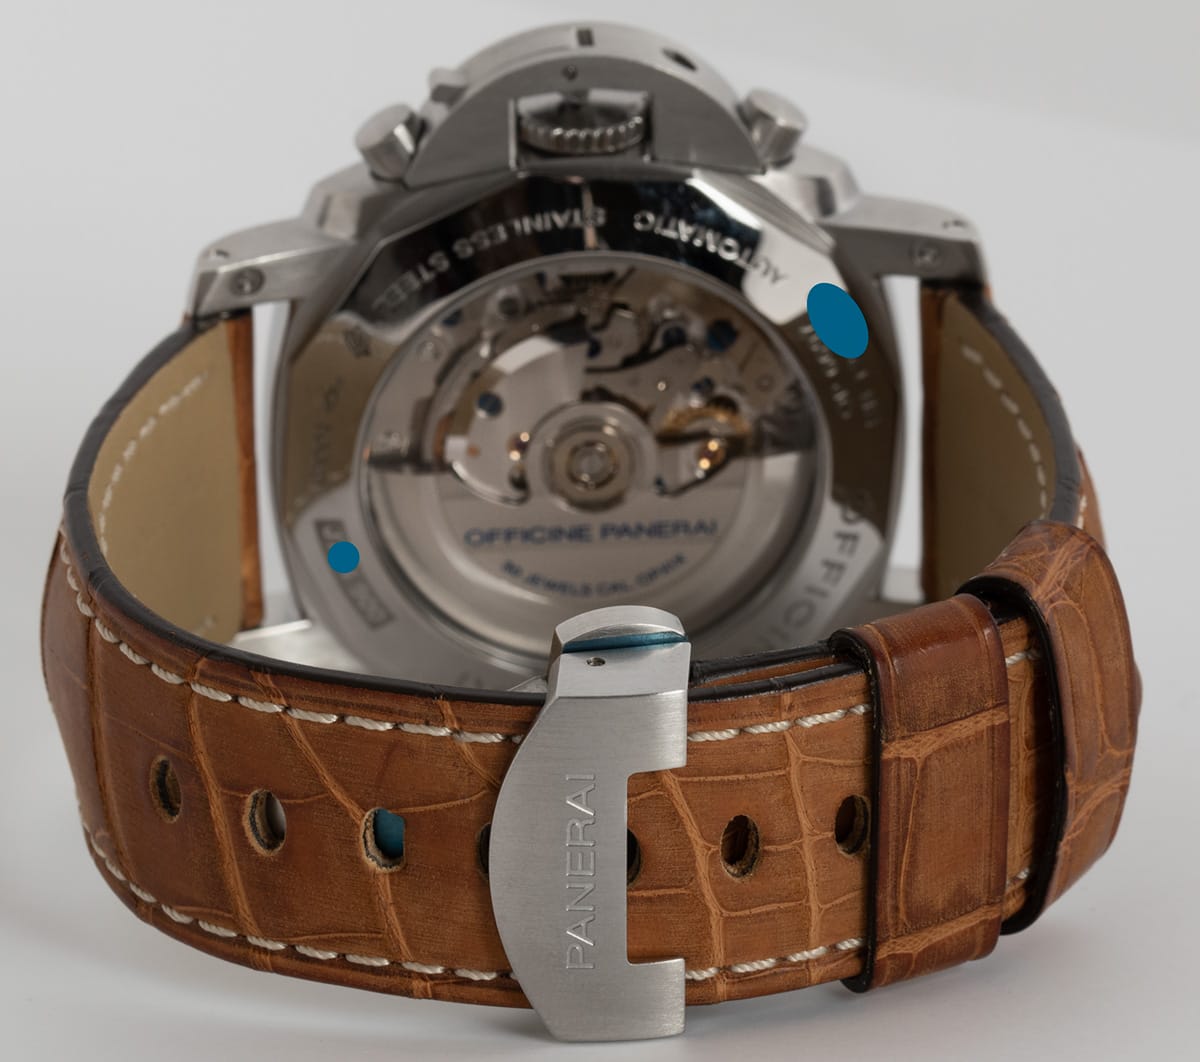 Rear / Band View of Luminor 1950 Flyback Chronograph